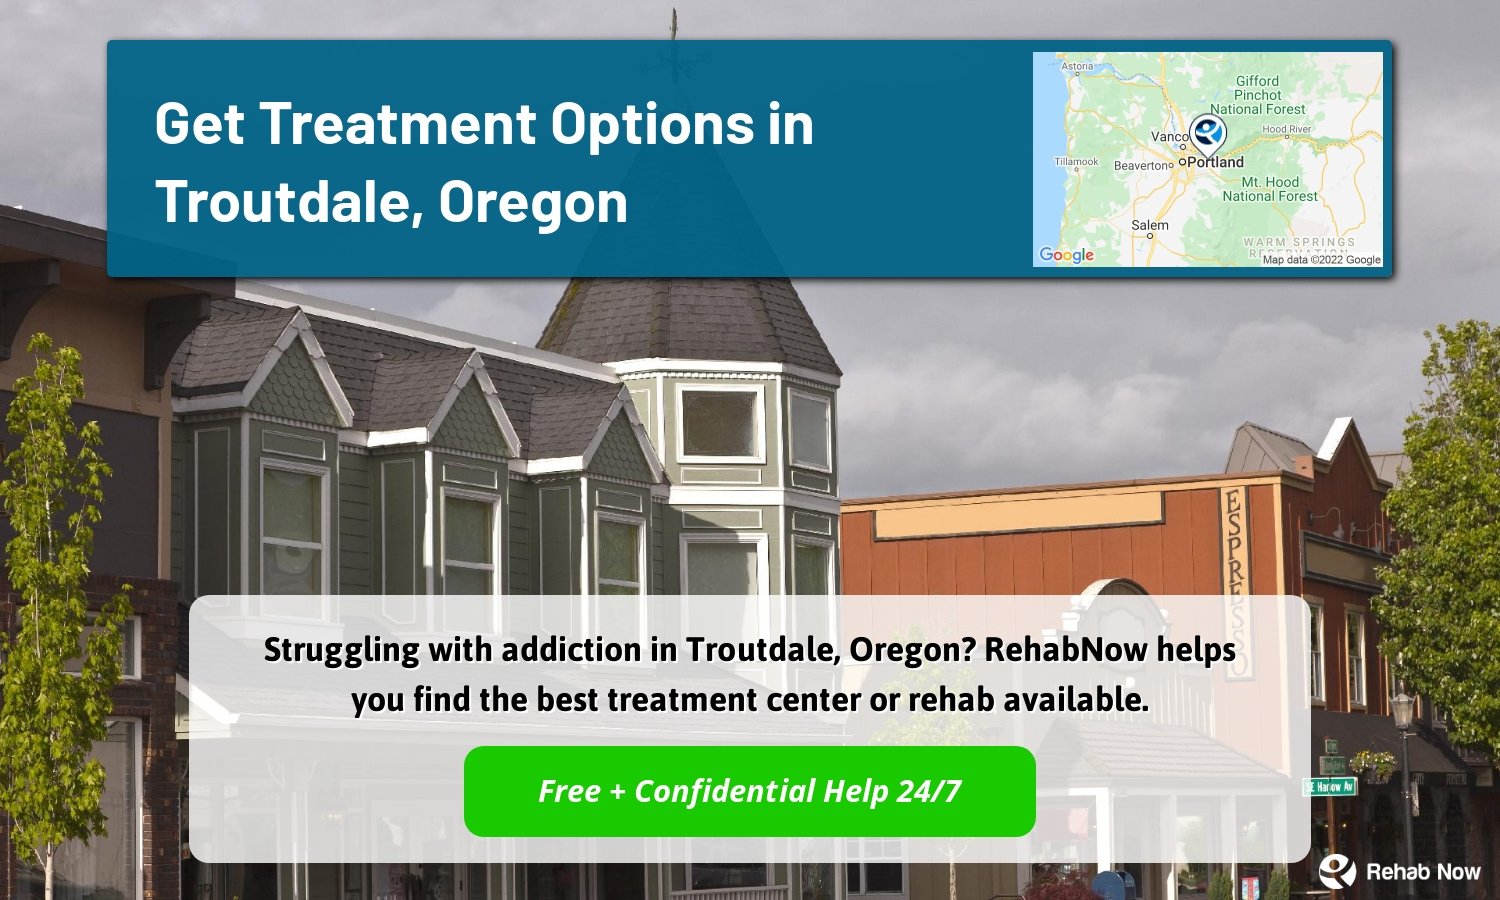 Struggling with addiction in Troutdale, Oregon? RehabNow helps you find the best treatment center or rehab available.